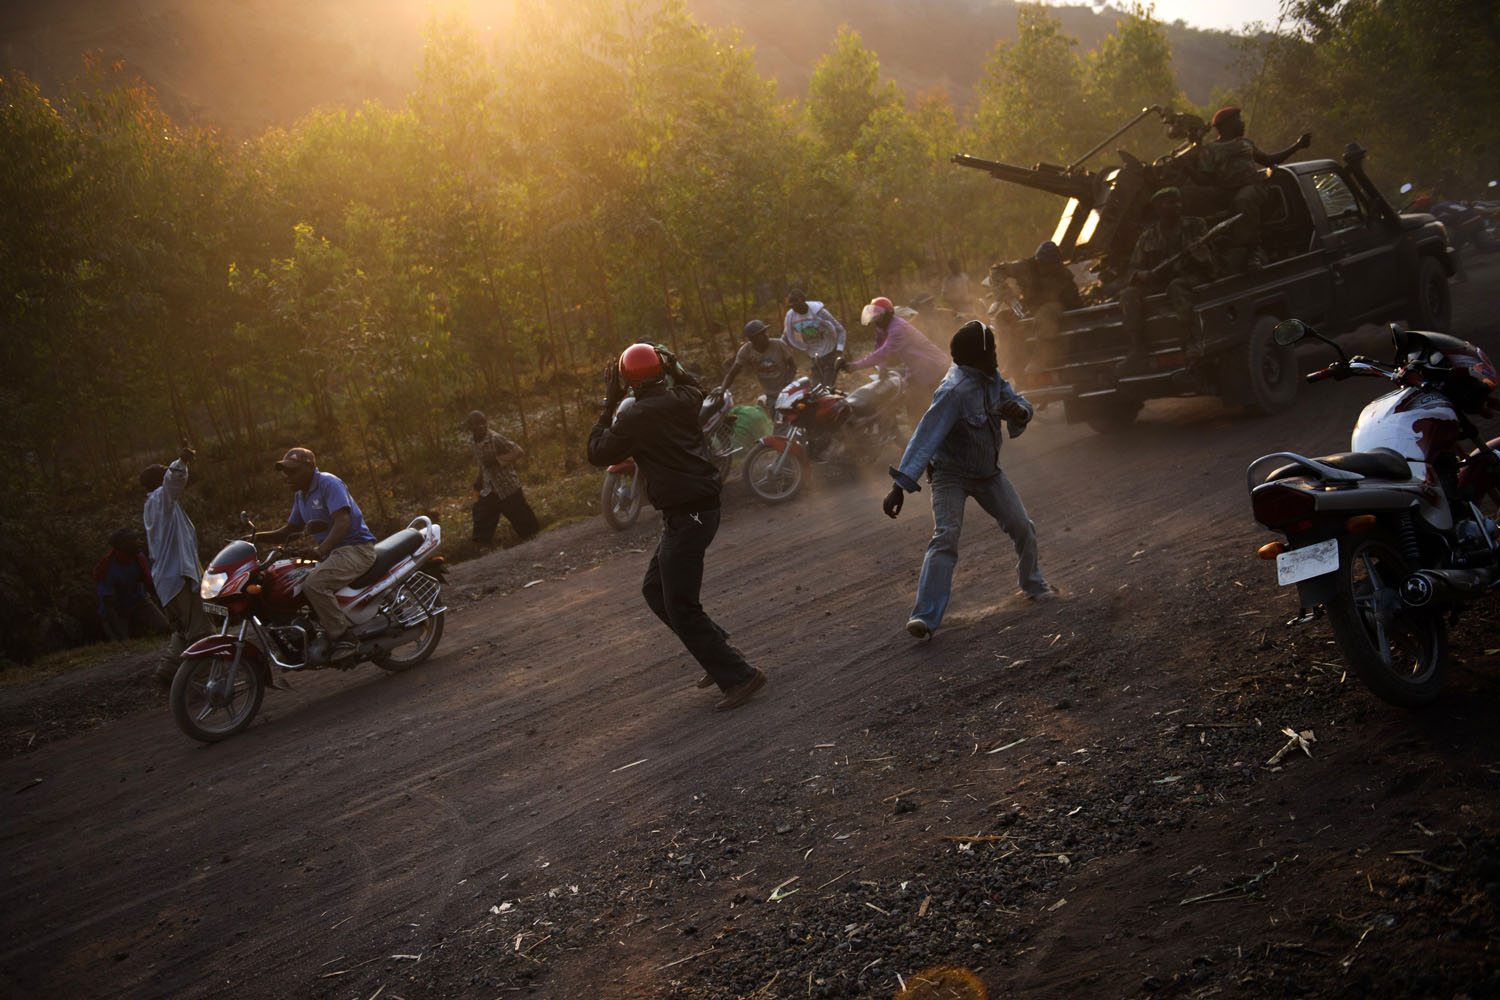 July 15, 2013. Civilians react to shell fire erupting as Congolese armed forces drive through the area of Munigi on the outskirts of Goma in the east of the Democratic Republic of the Congo.